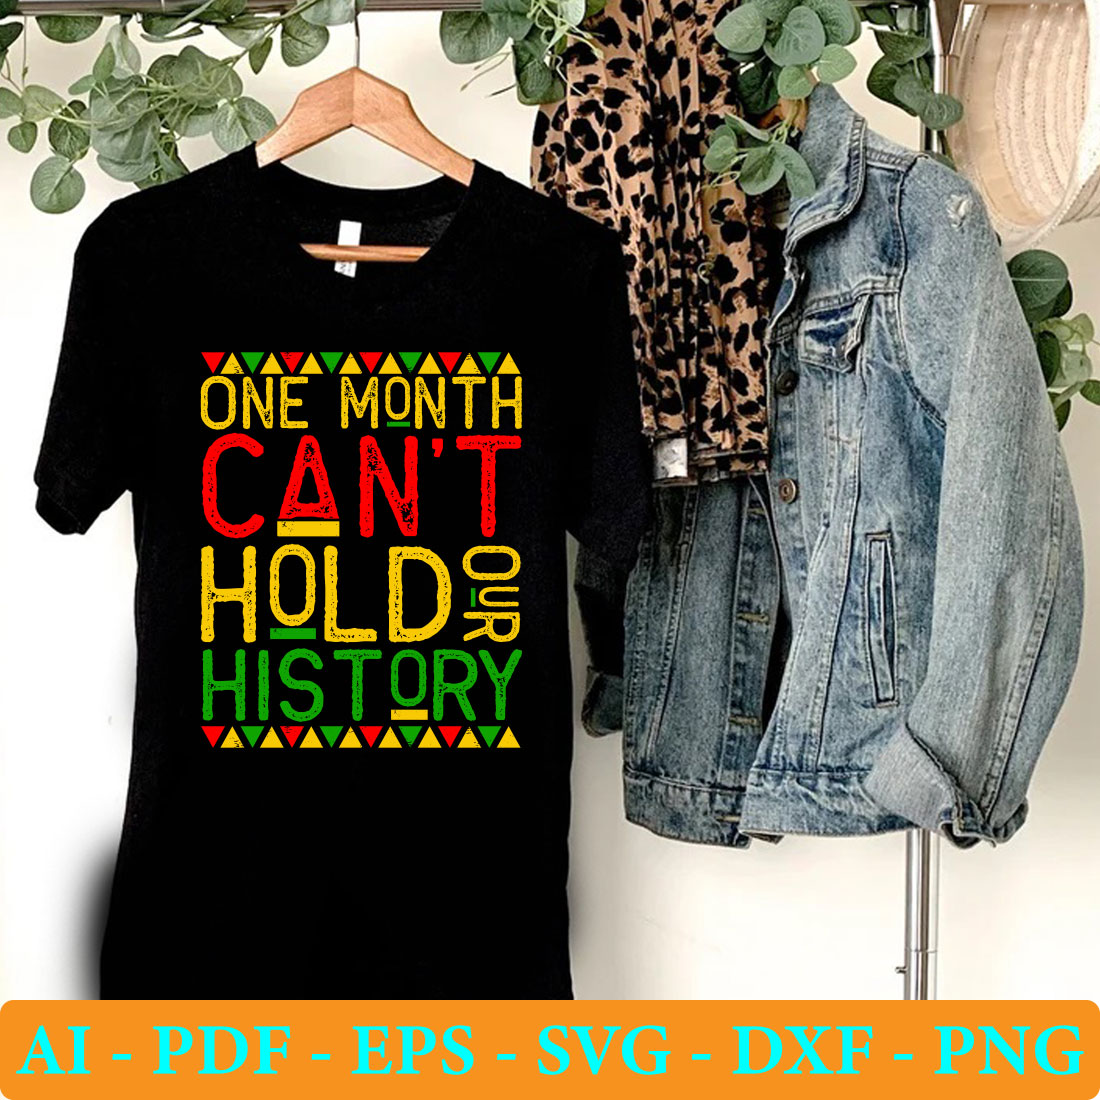 One month can't hold a history t - shirt.